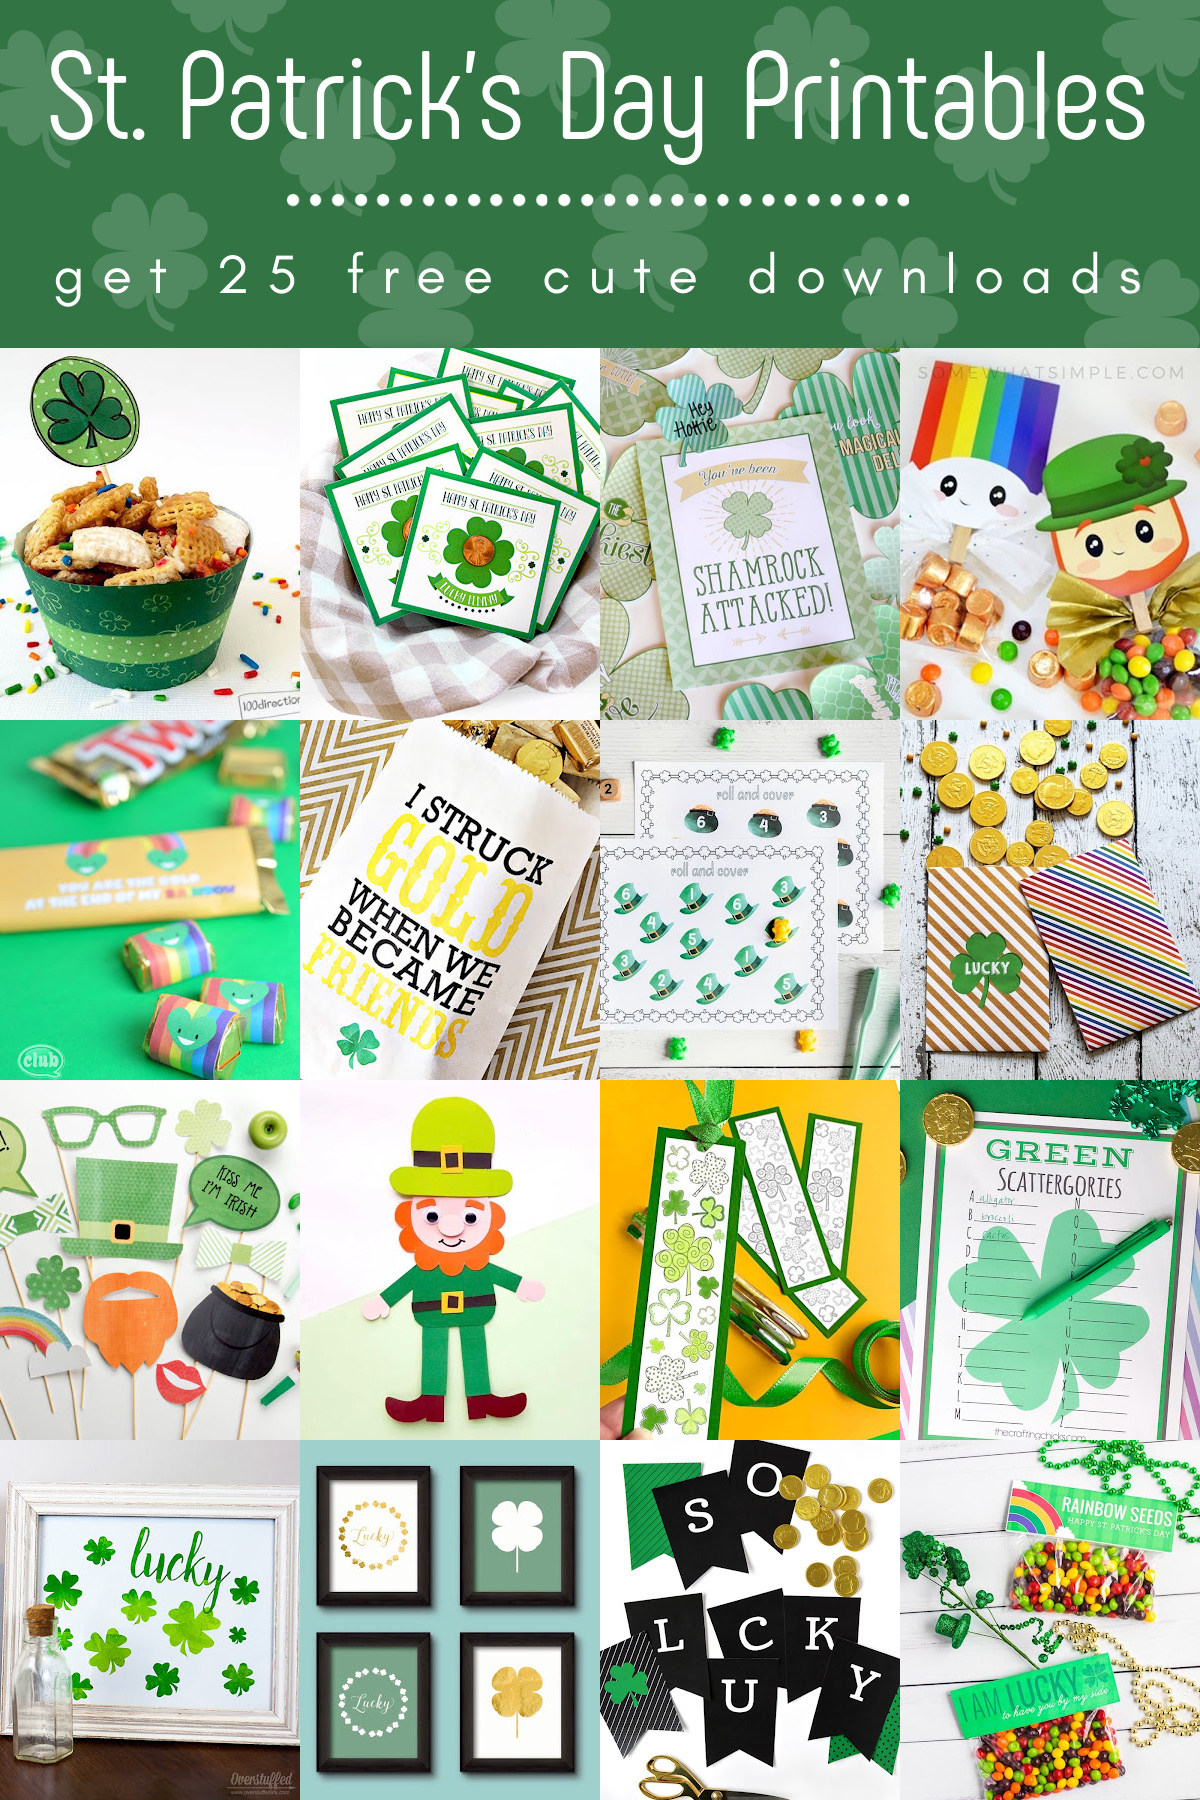 St. Patrick's Day Printables you'll love